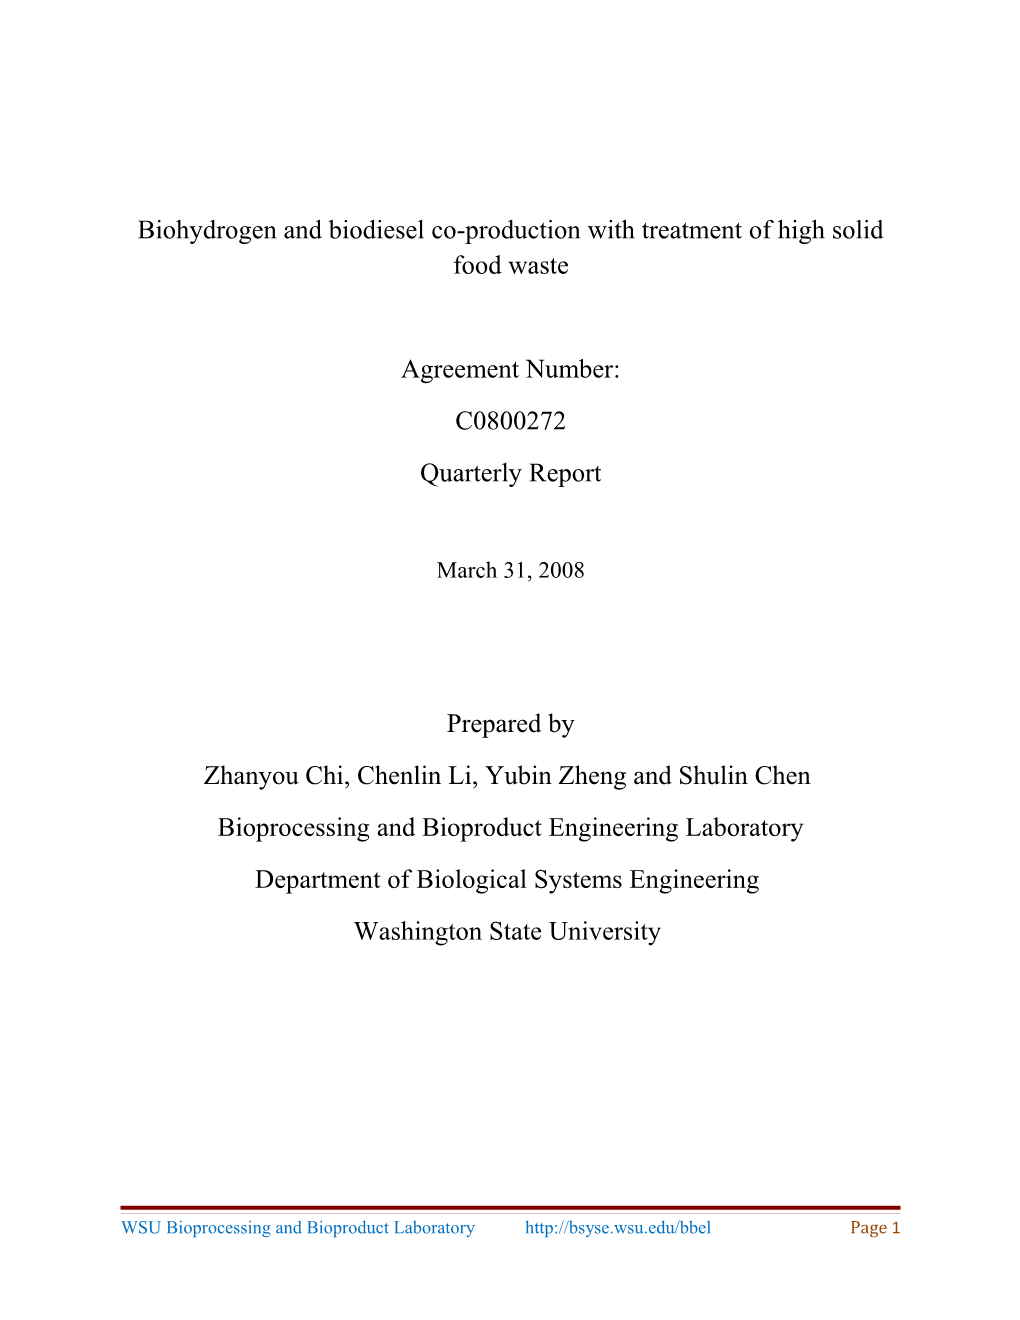 Biohydrogen and Biodiesel Co-Production with Treatment of High Solid Food Waste